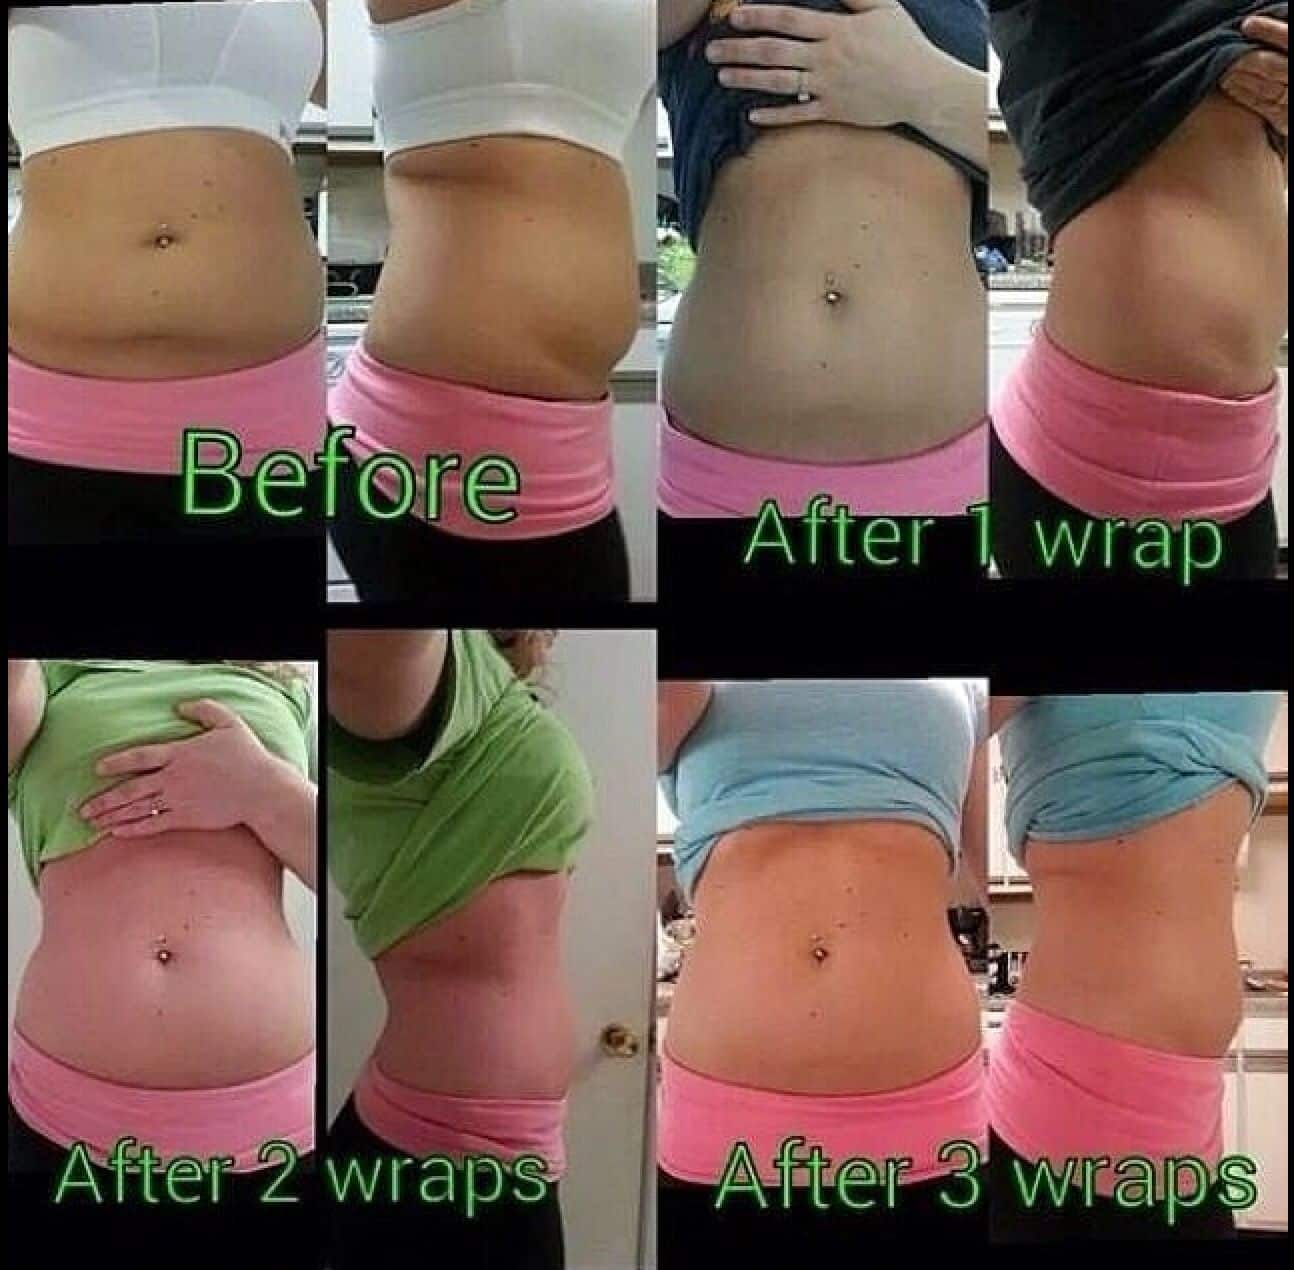 If you have loose saggy skin that you want to Tone, Tighten and Firm ...